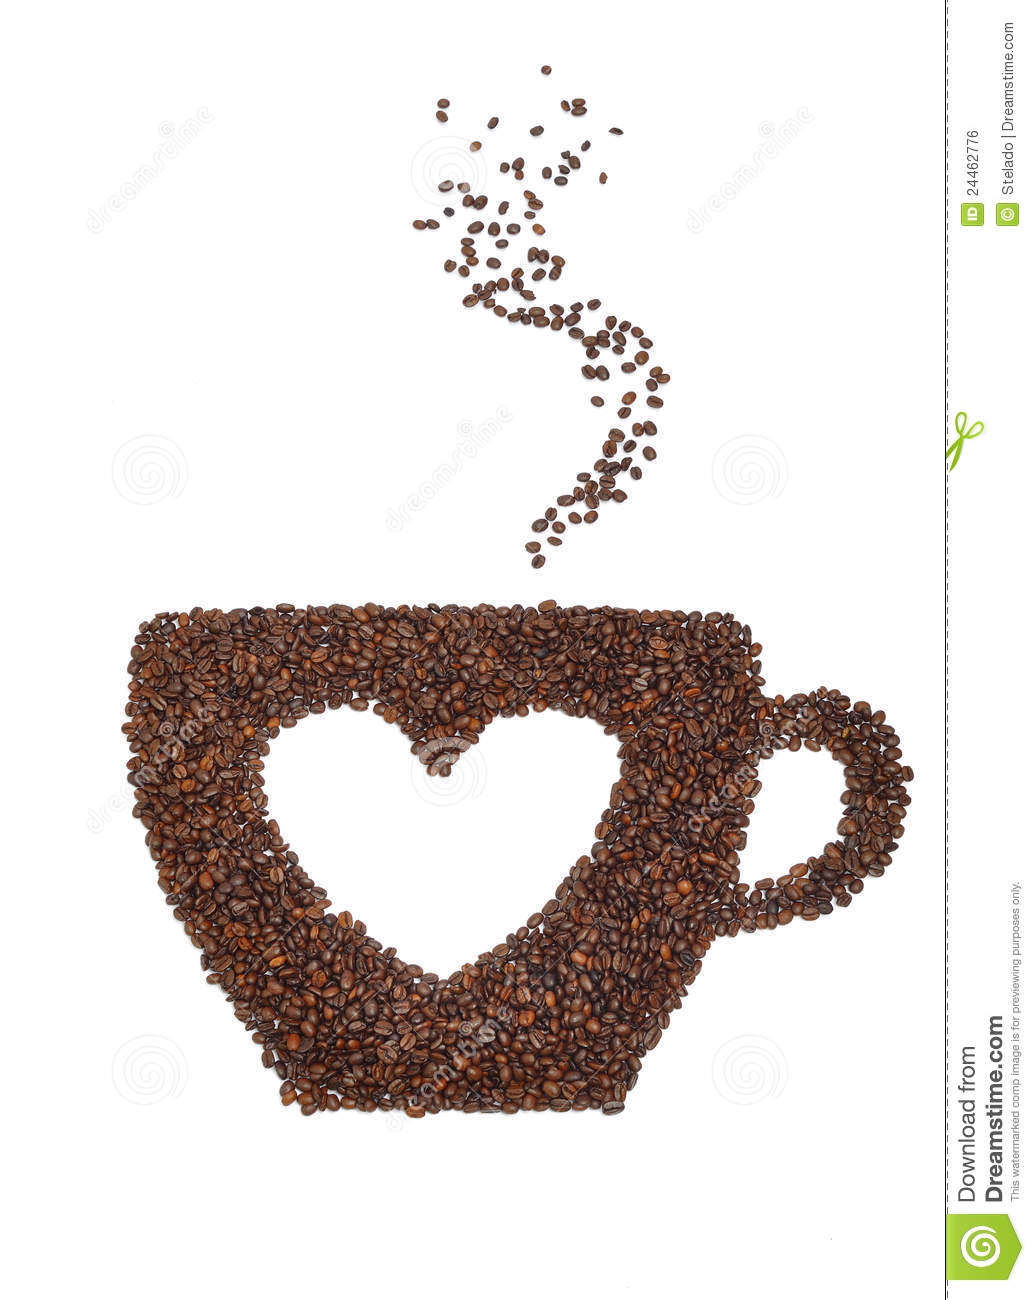 Cup Coffee Made From Coffee Beans With A Heart Symbol Isolated On